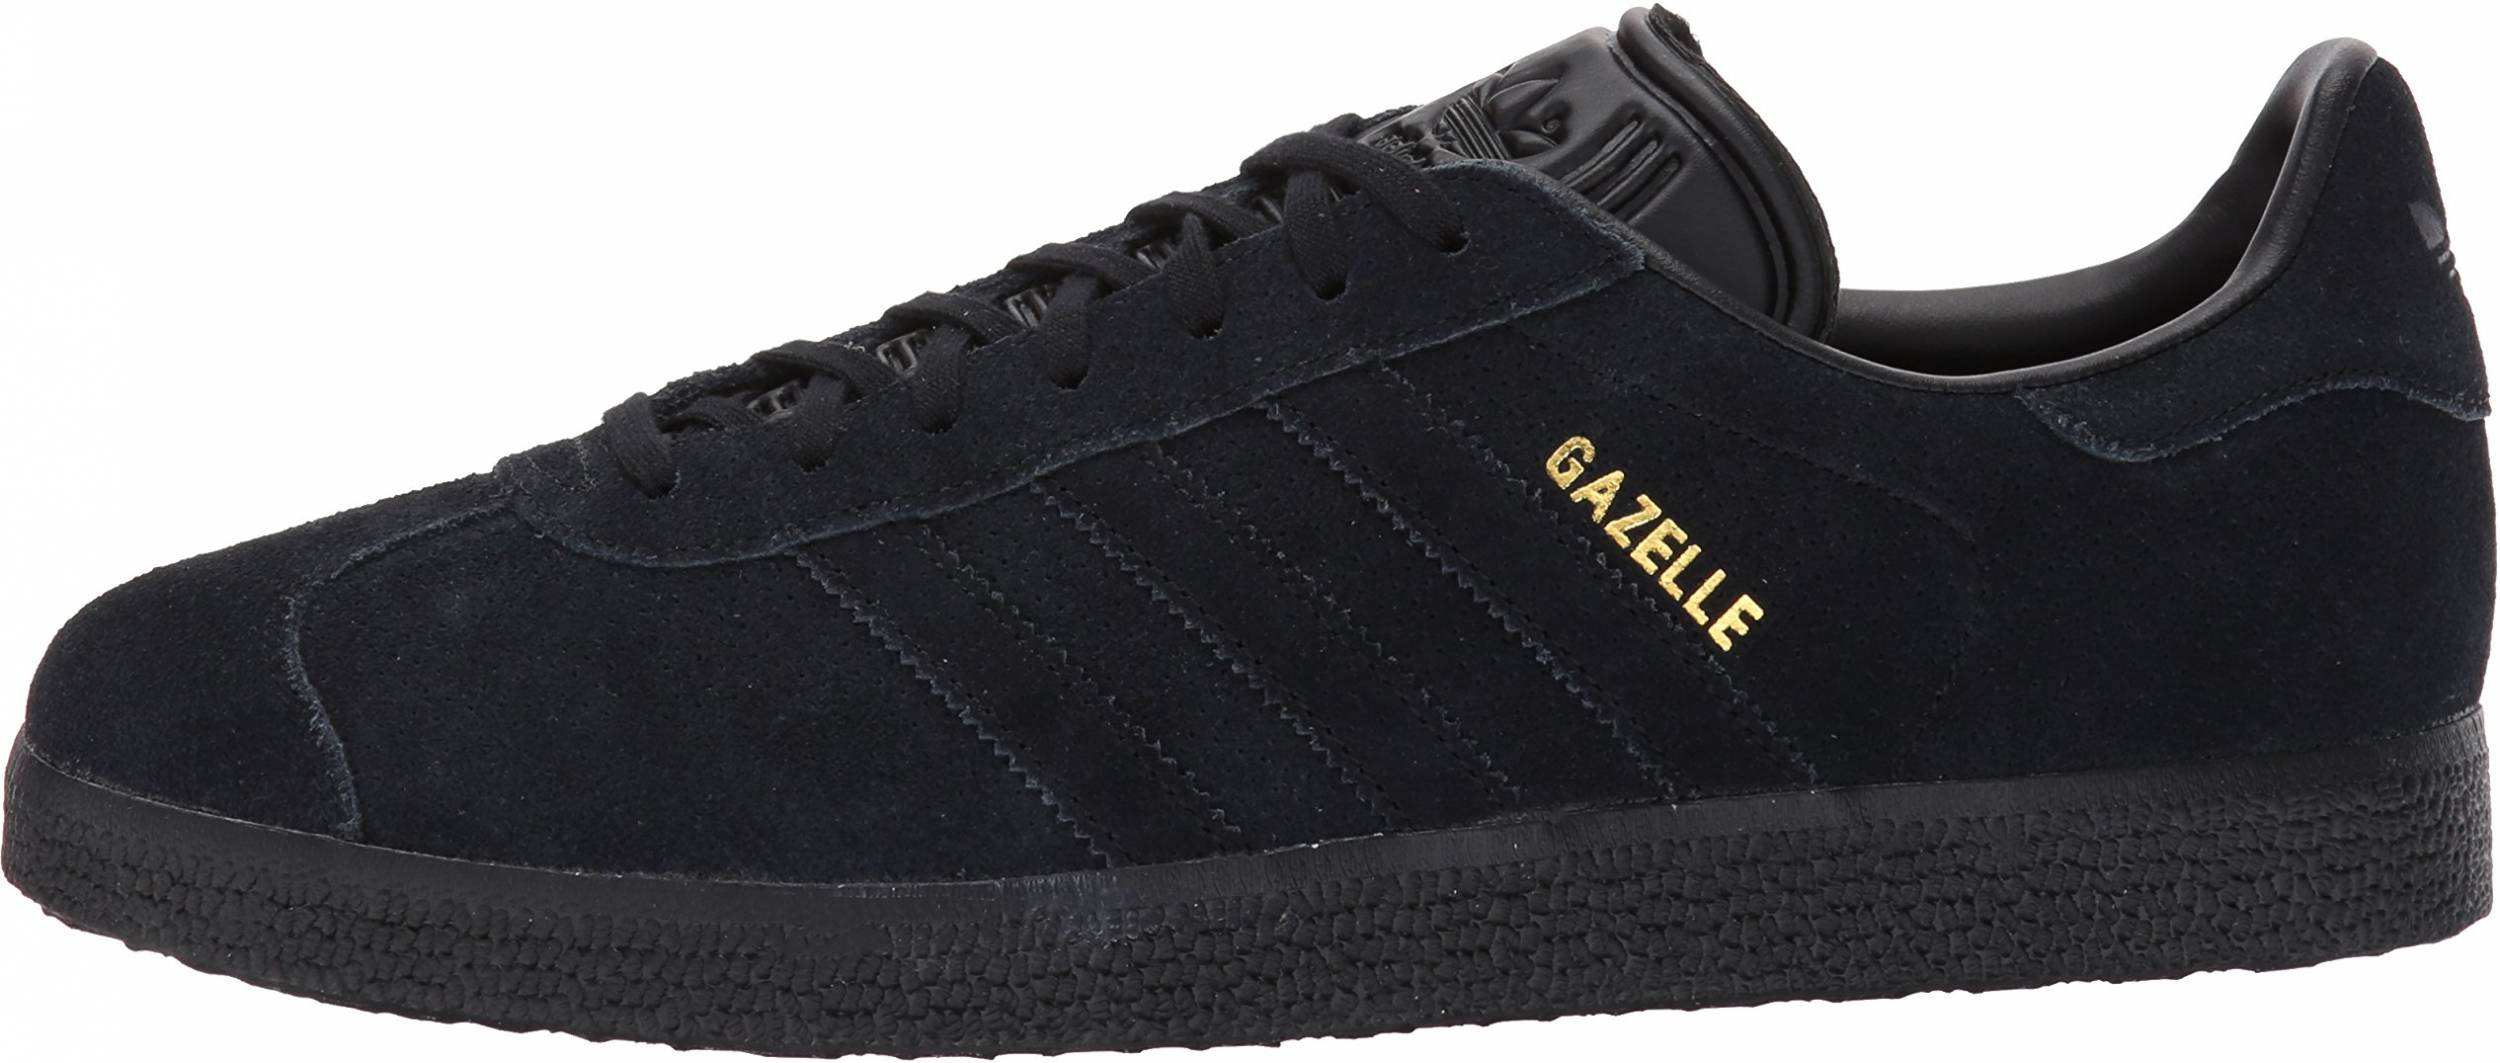 Save 61% on Adidas Sneakers (637 Models 